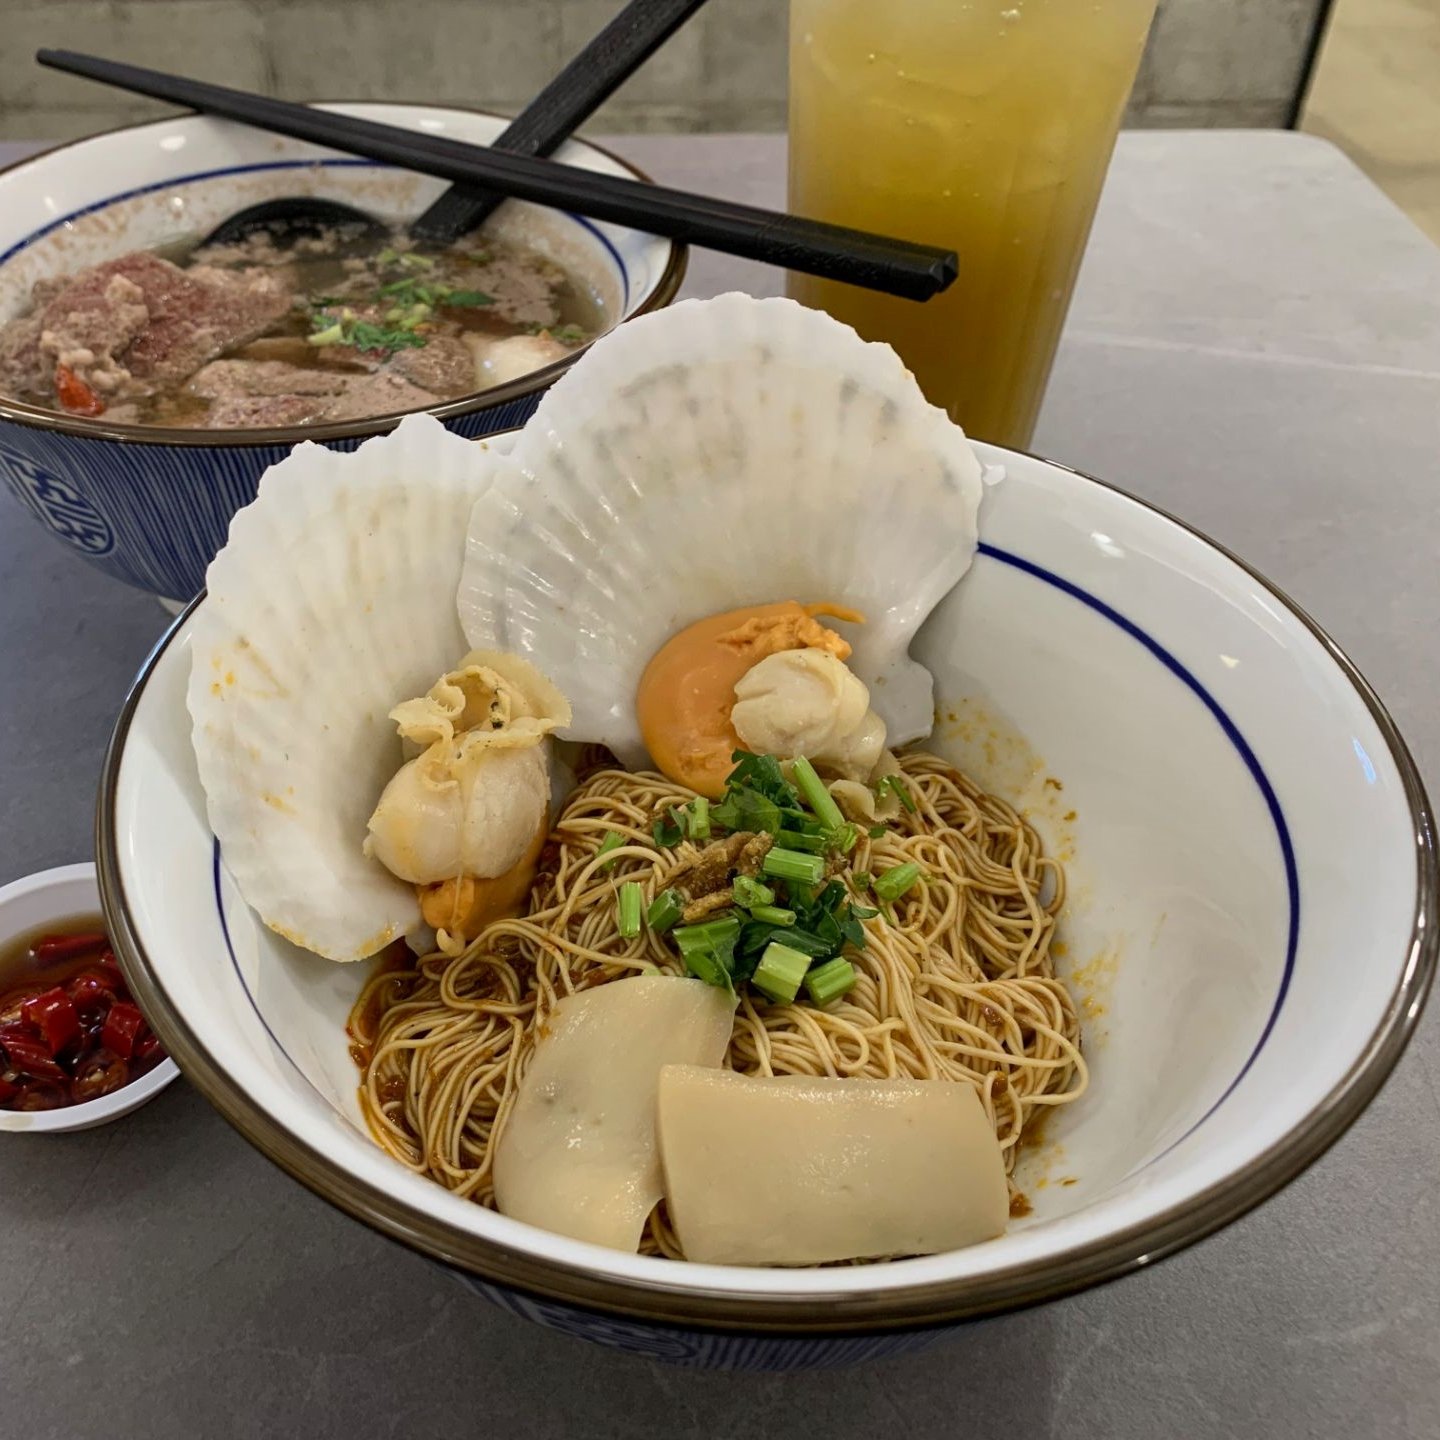 Picnic @ Greenwich V 潶志麵家 Orh-Kee Noodles - Hotate Scallop Noodles